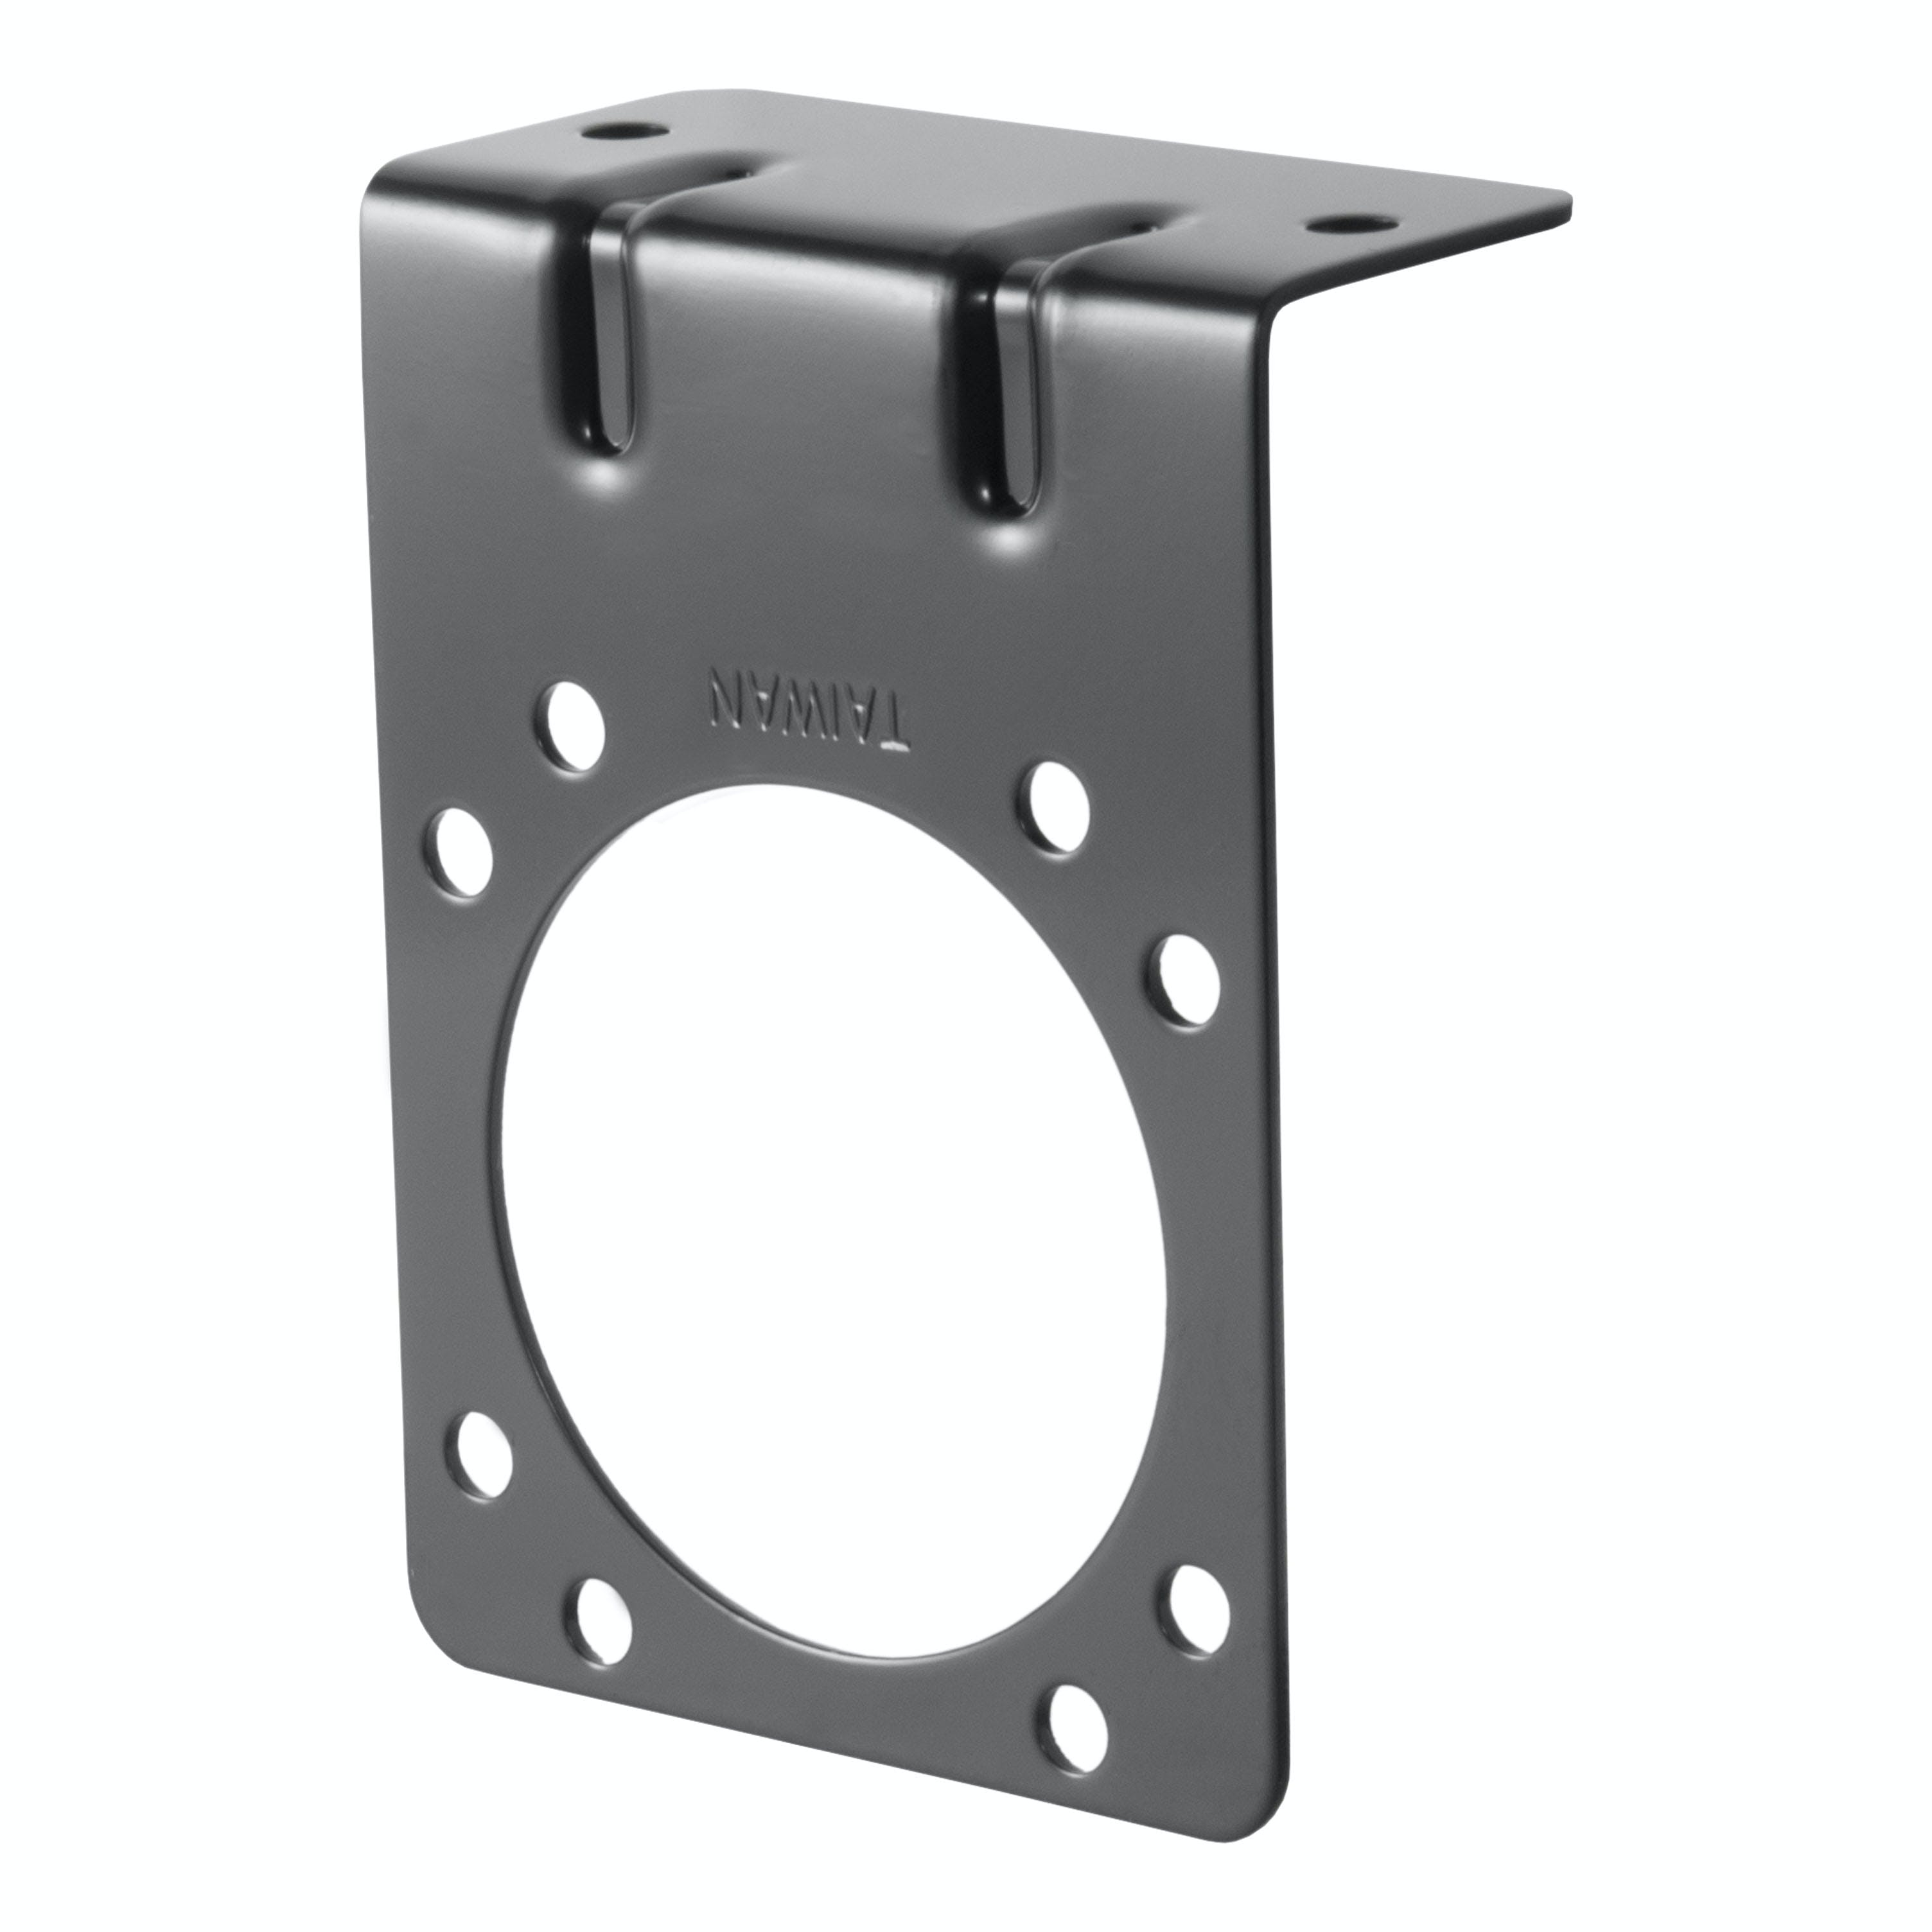 CURT 58291 Connector Mounting Bracket for 7-Way RV Blade (Black, Packaged)